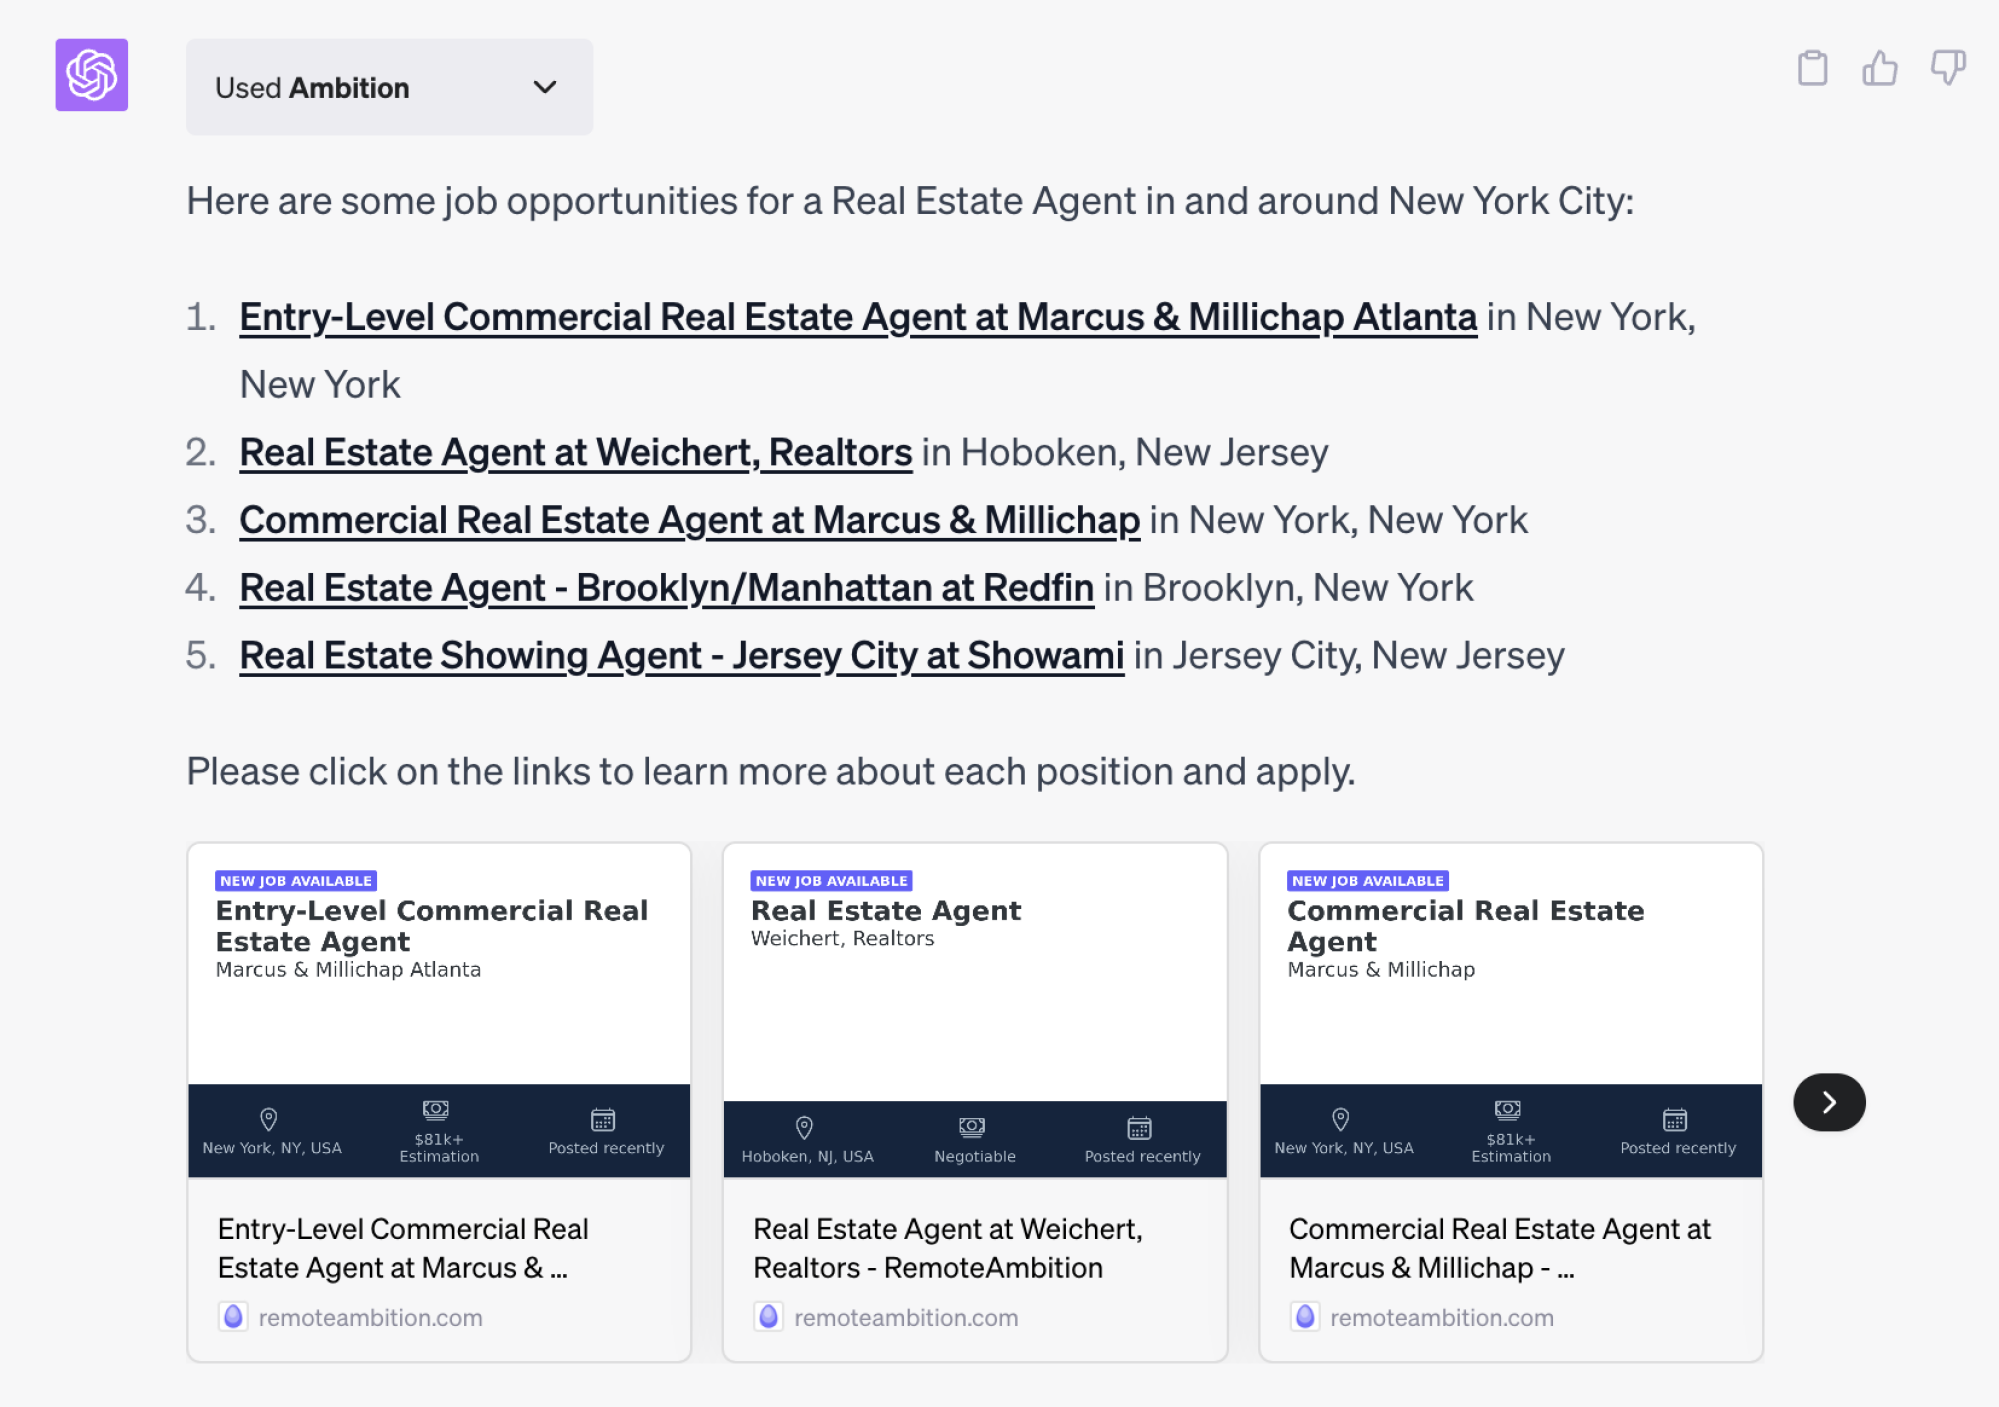 Ambition generated job listings for a real estate agent